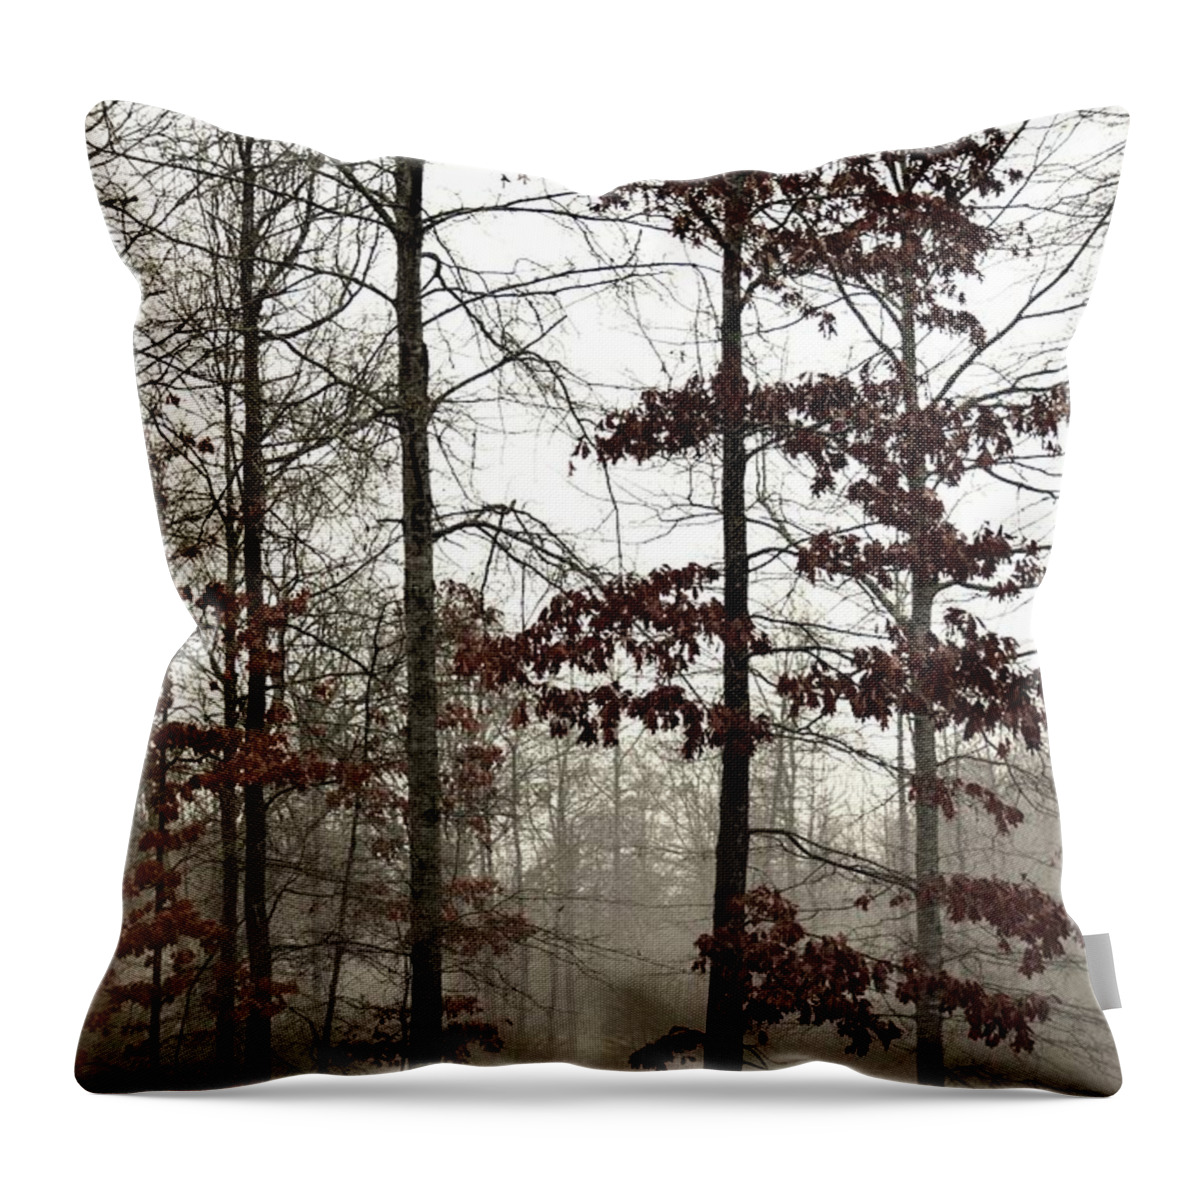 The Mist Throw Pillow featuring the photograph The Mist by Maria Urso